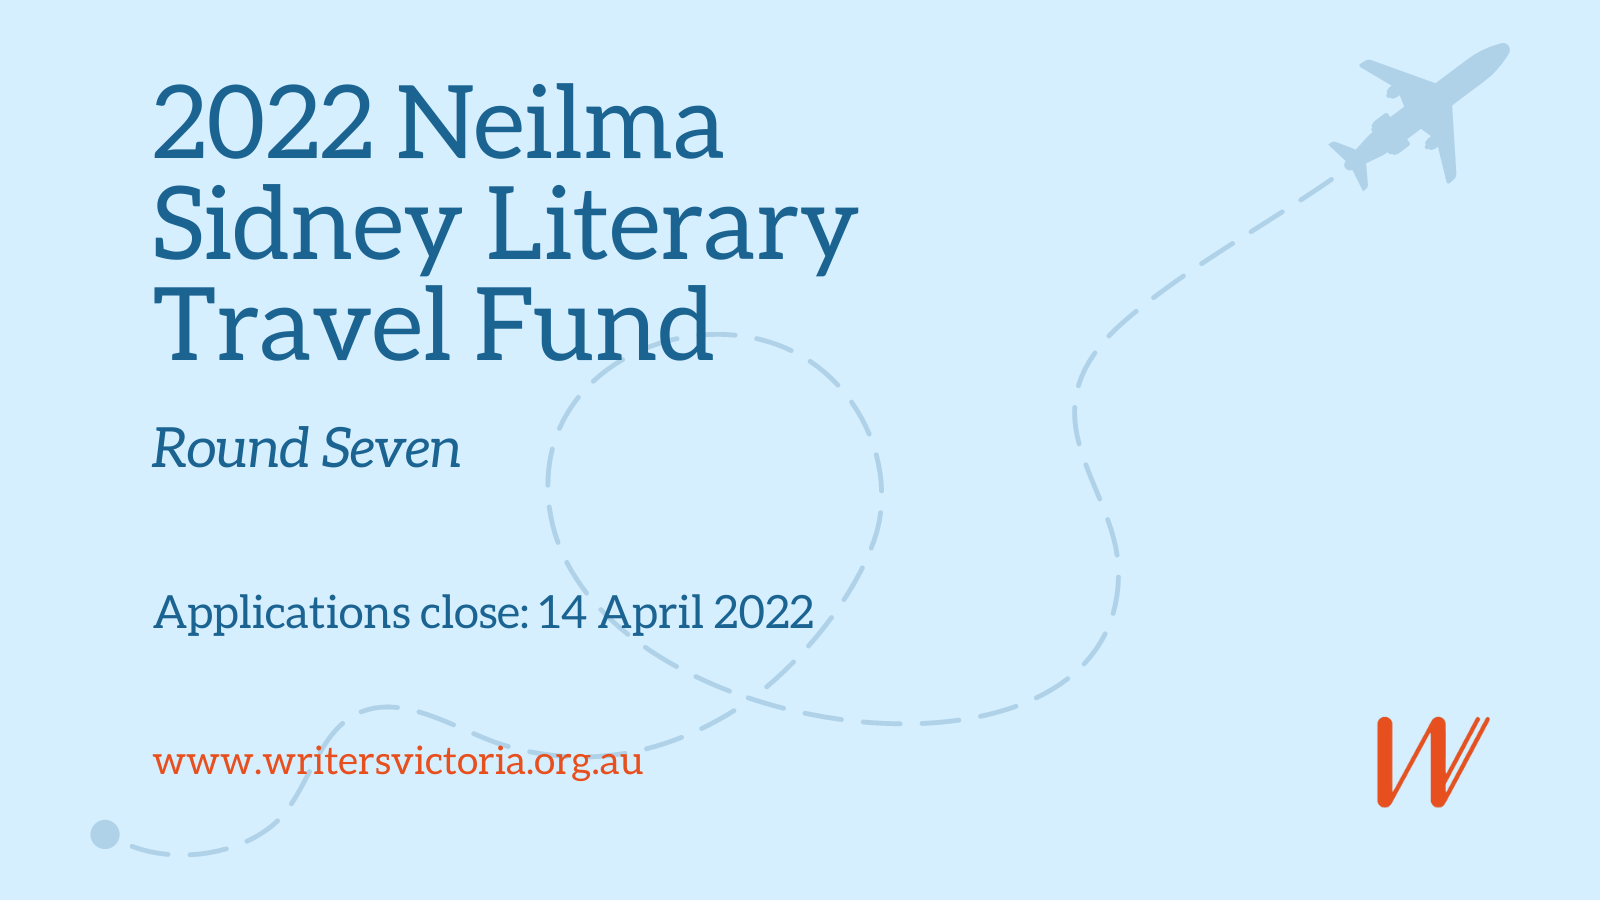 Round Seven of The Neilma Sidney Literary Travel Fund Opens for Applications